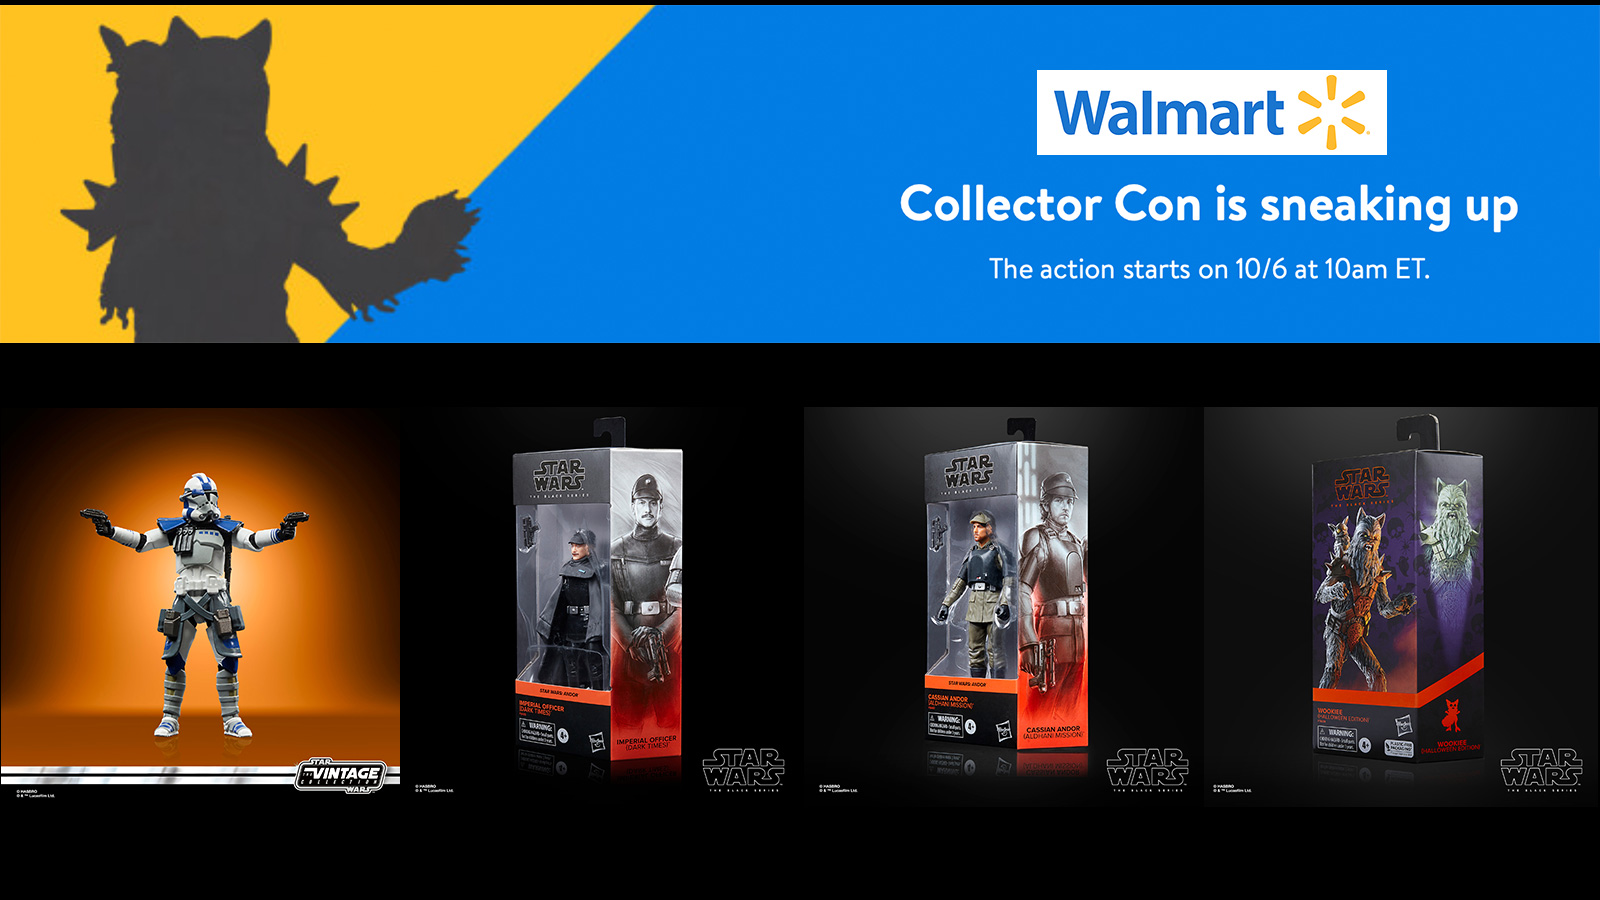 Walmart Collector Con 10/6 At 10AM ET - What 3 Or 4 Hasbro Star Wars Products To Expect - With Links